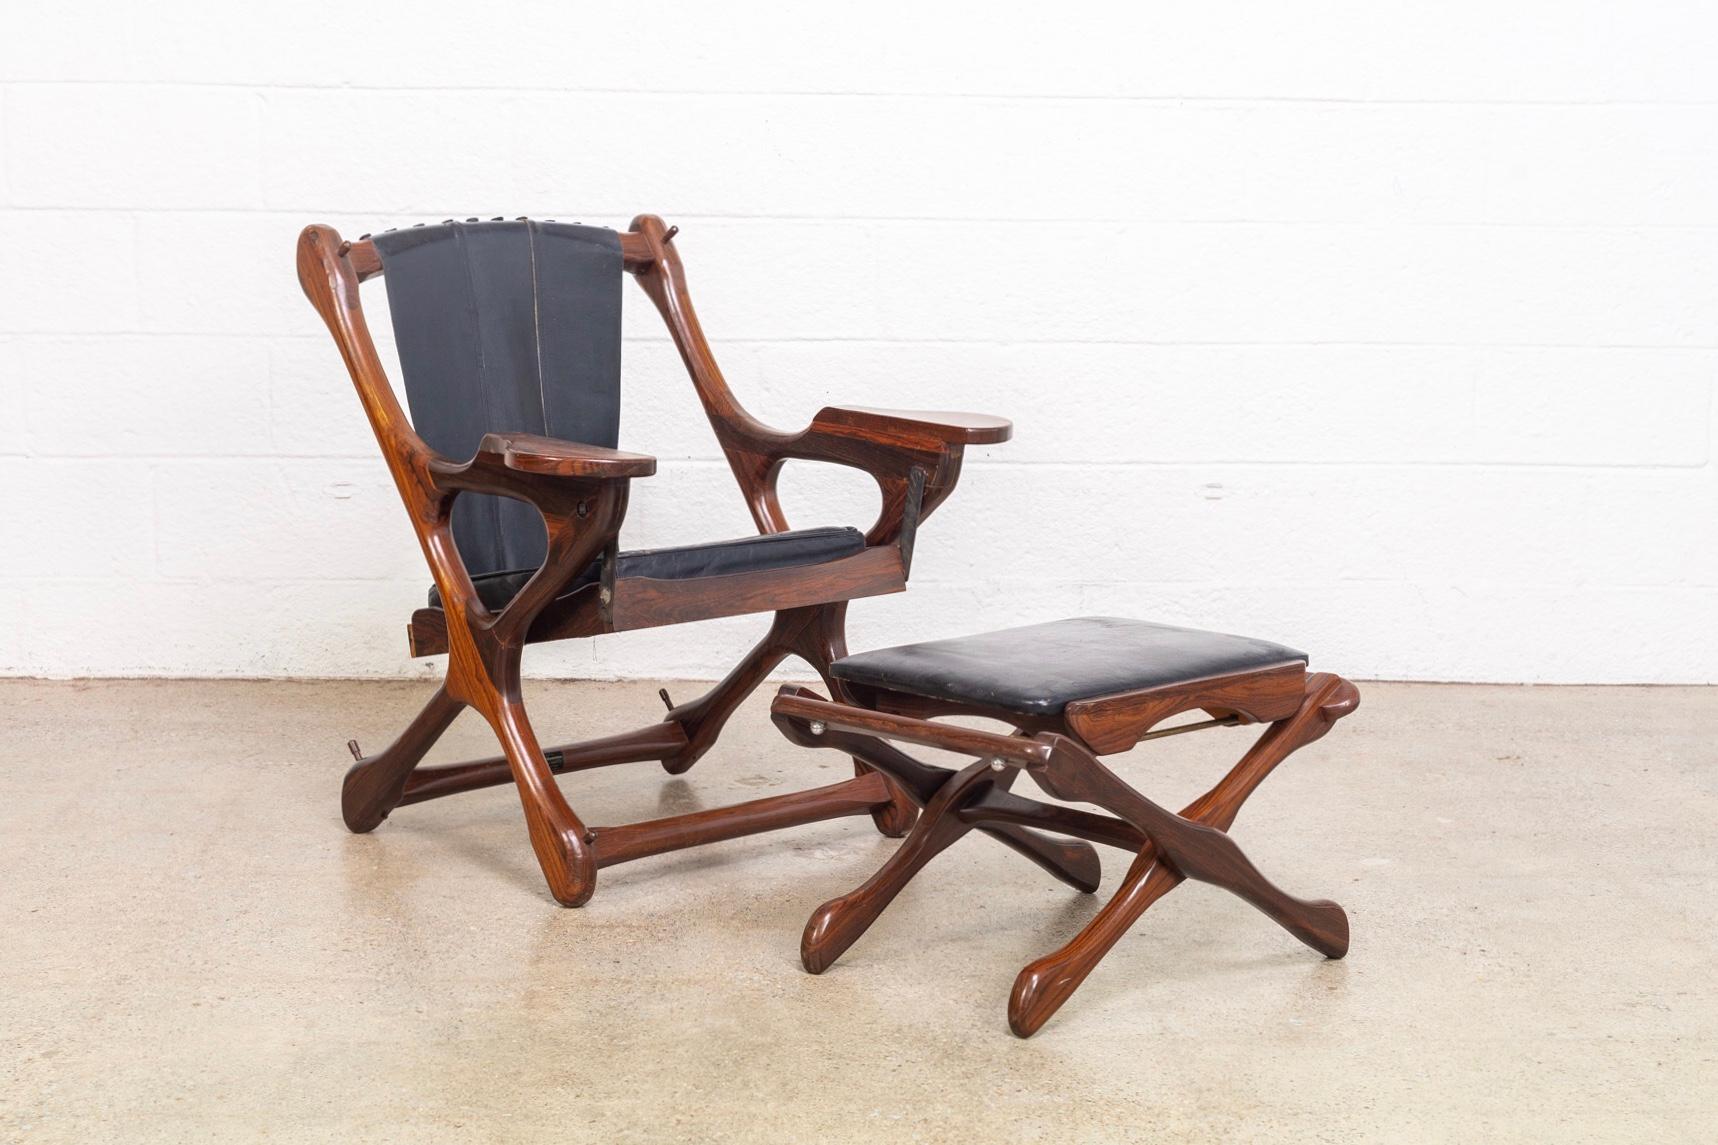 This vintage mid century modern armchair was designed in the 1950s by Don Shoemaker and produced by Señal, S.A., Mexico circa 1960. A leading mid century Mexican modernist, Shoemaker’s pieces feature biomorphic shapes and exotic woods designed with